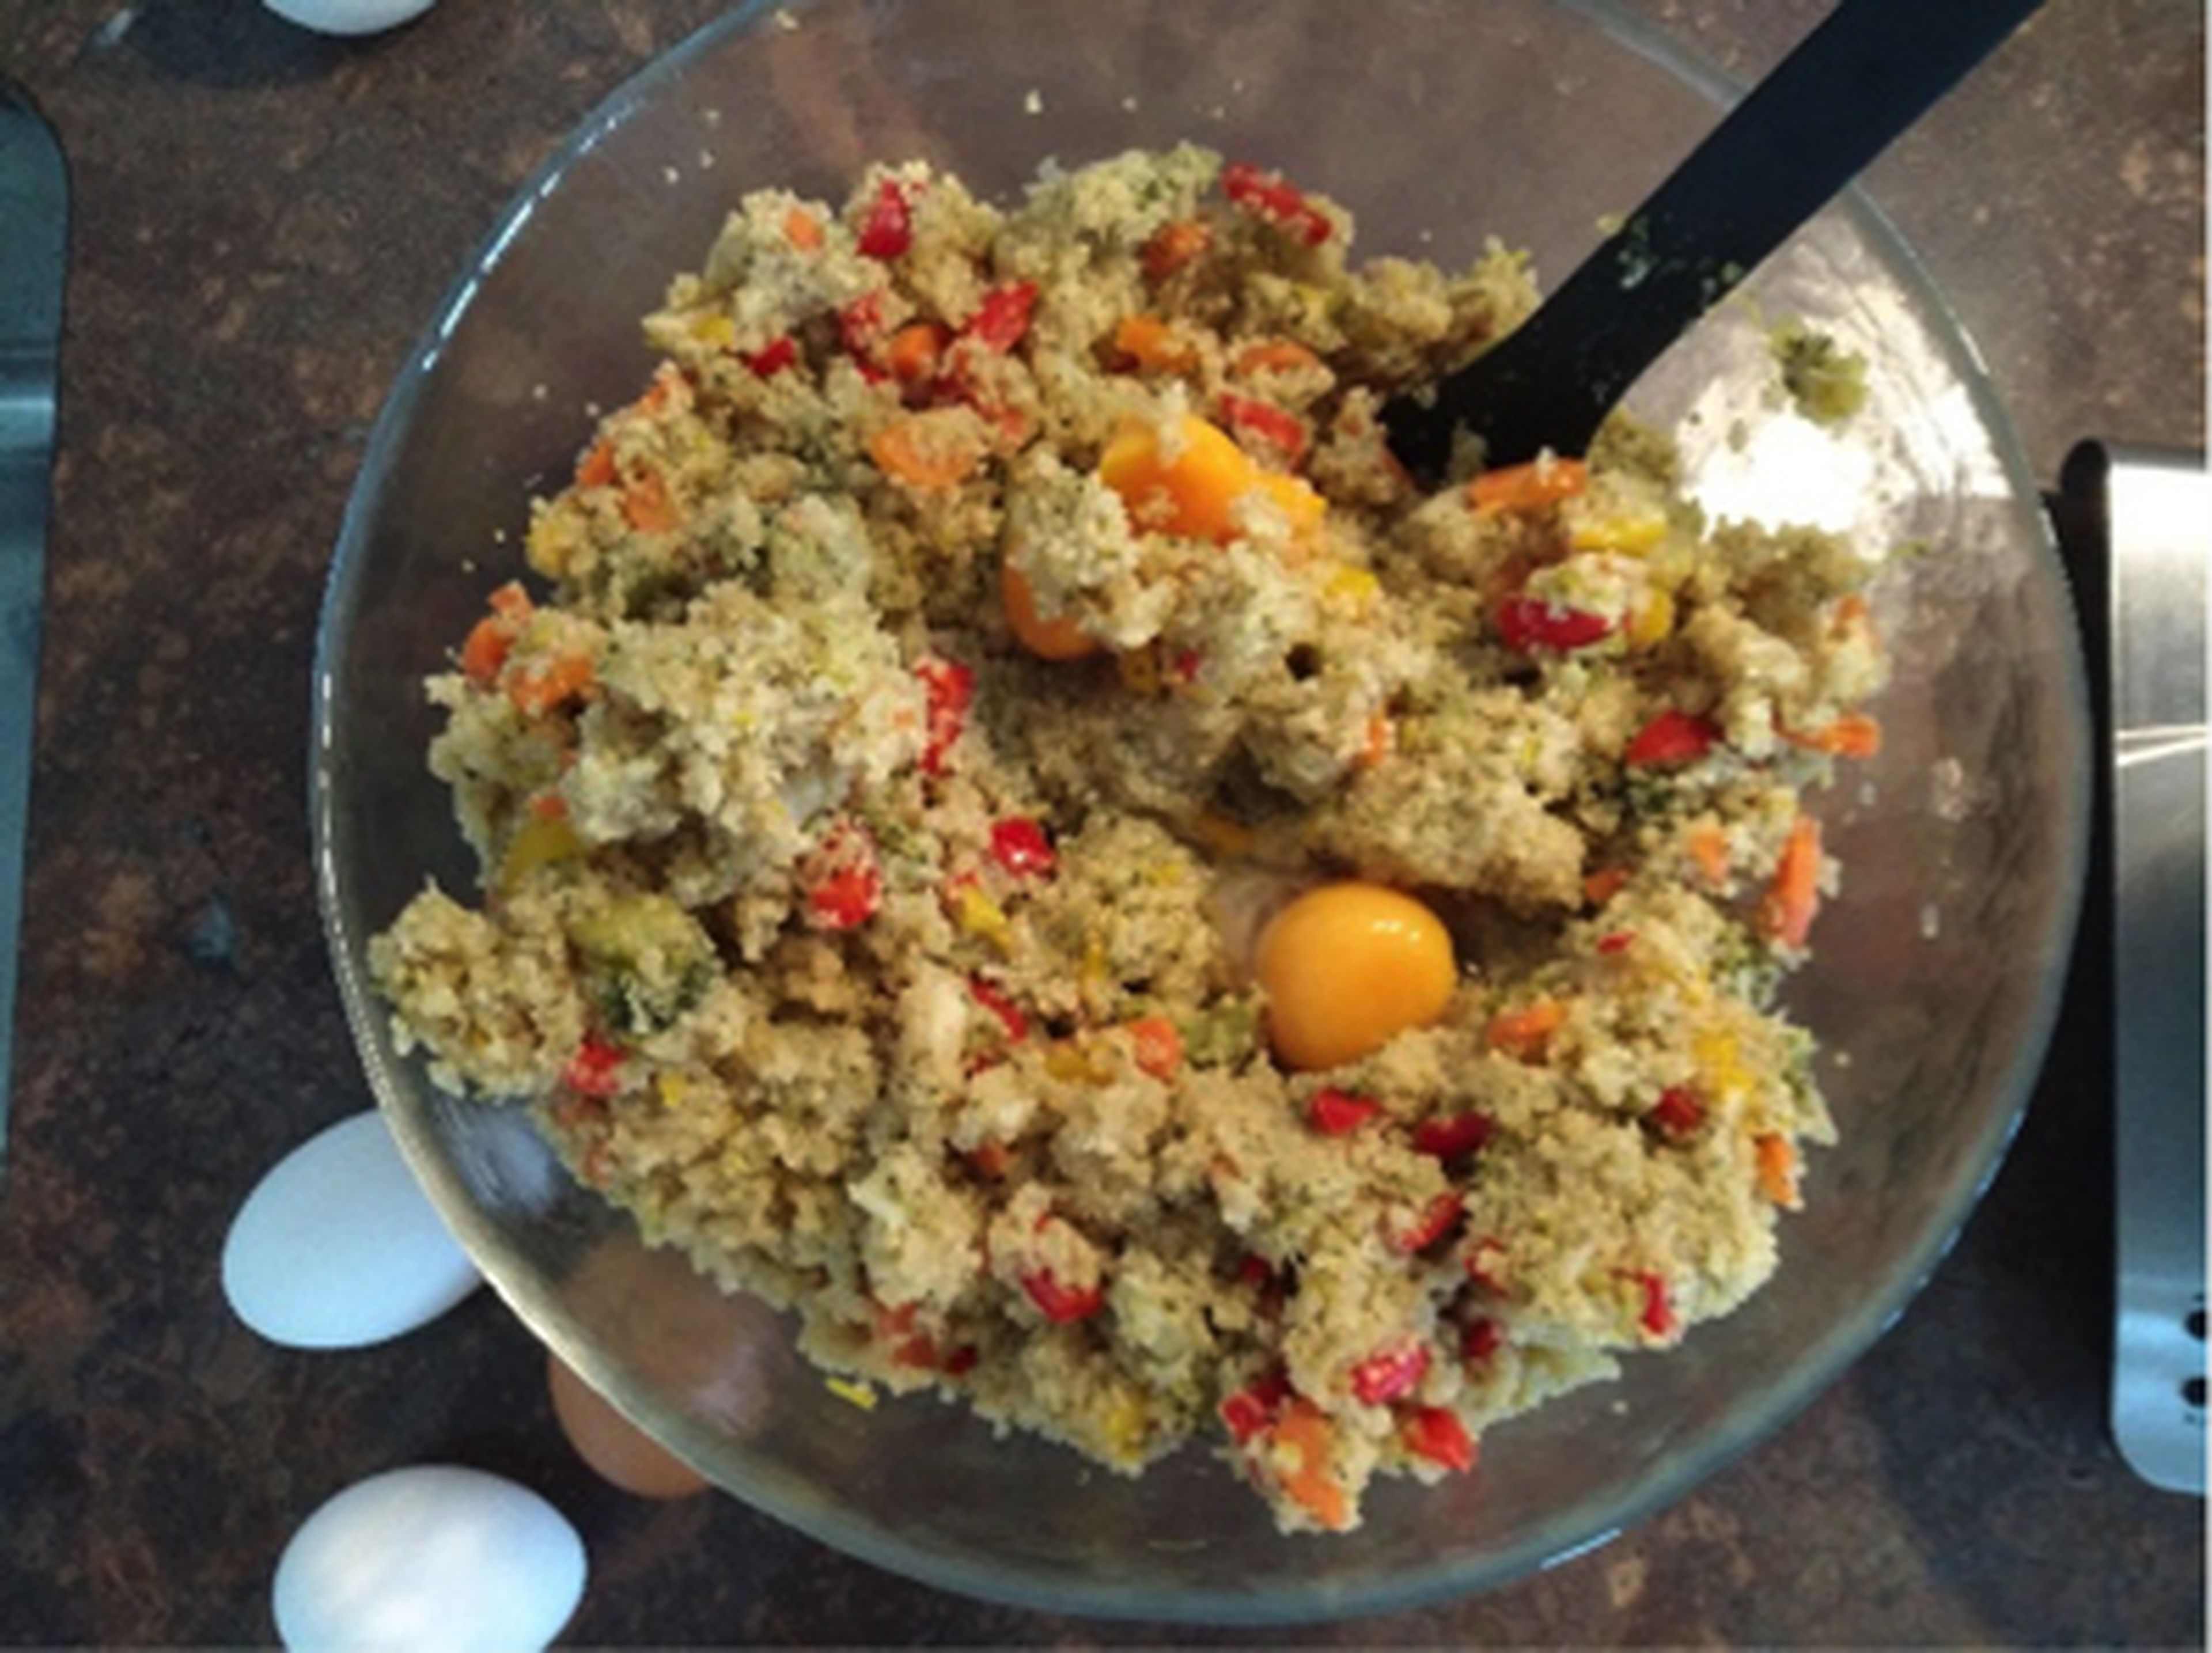 Preheat the oven to 200°C/400°F. Add eggs and some breadcrumbs to the quinoa mixture. Season with salt and pepper to taste, and mix well to a uniform mass. Form into palm-sized patties and place on a parchment-lined baking sheet.